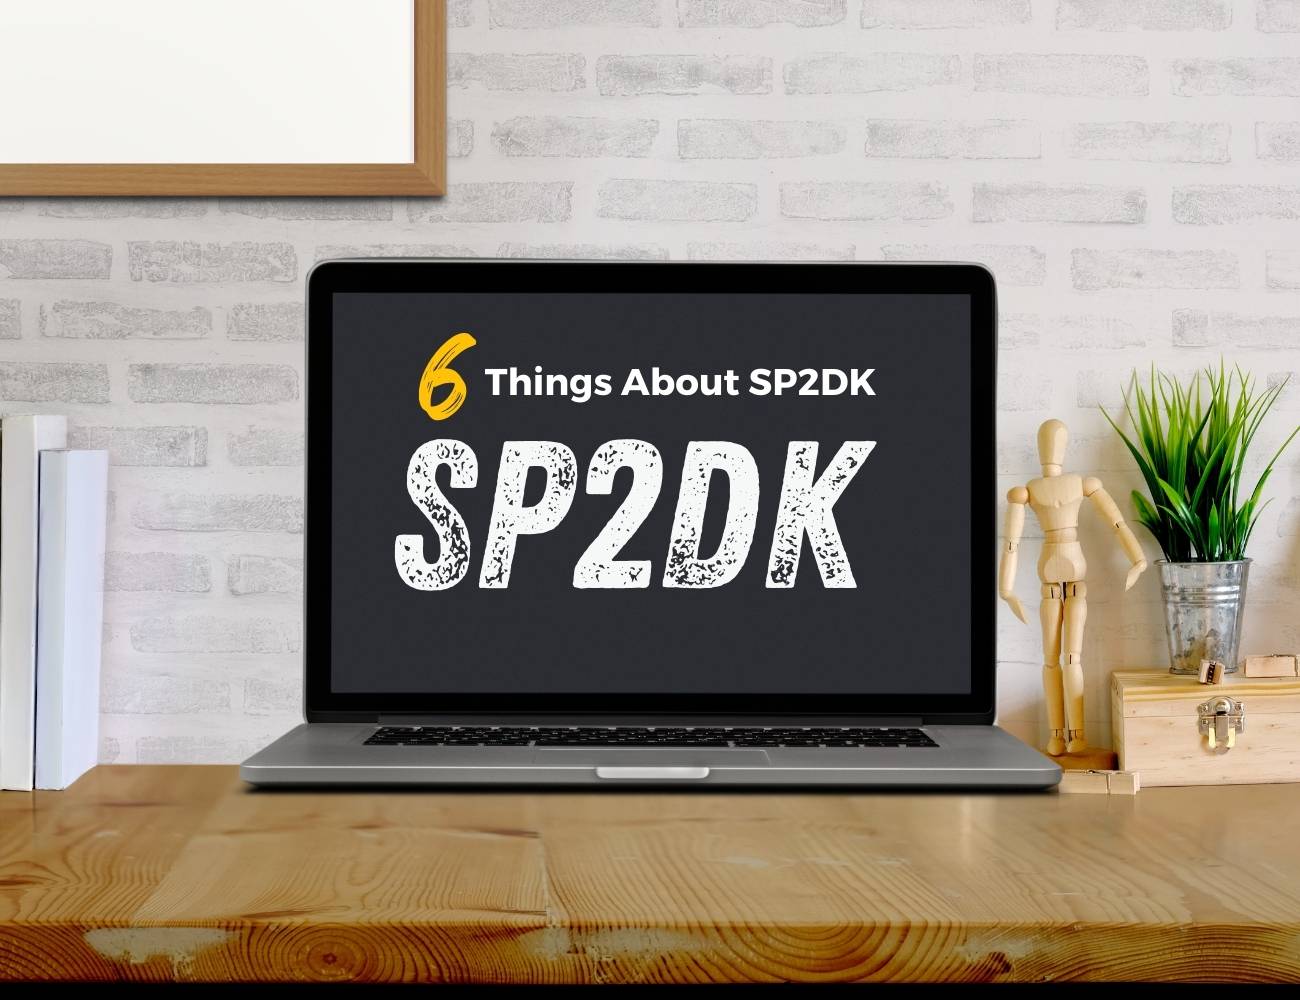                     Six Things to Know About SP2DK
                                        